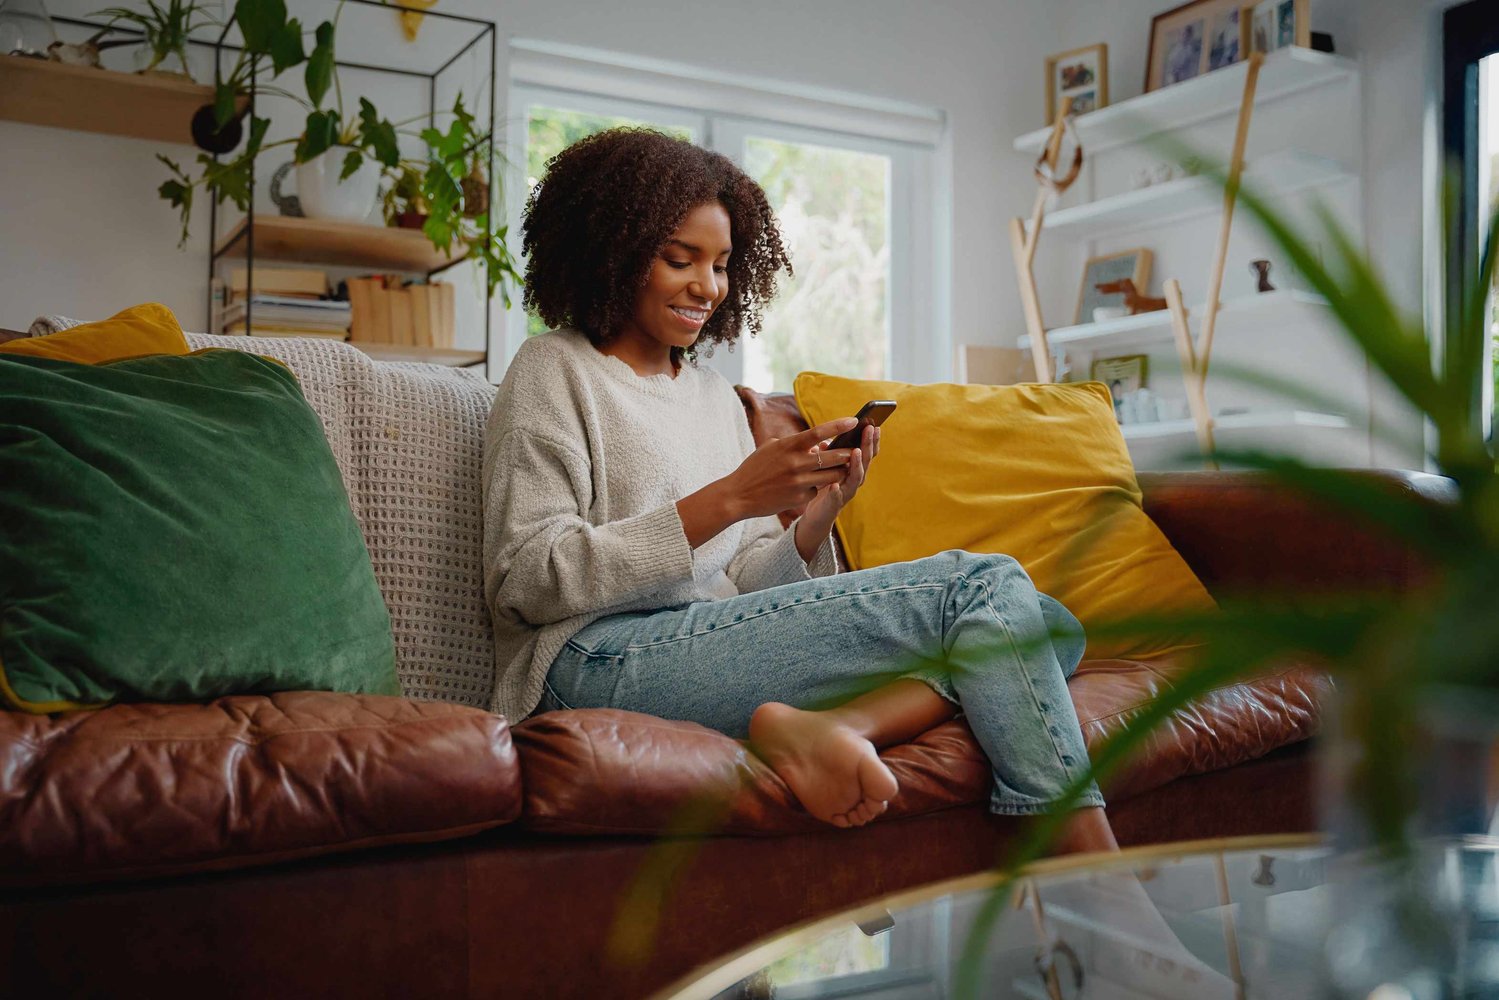 Image shows young woman sitting on a sofa looking at a phone screen